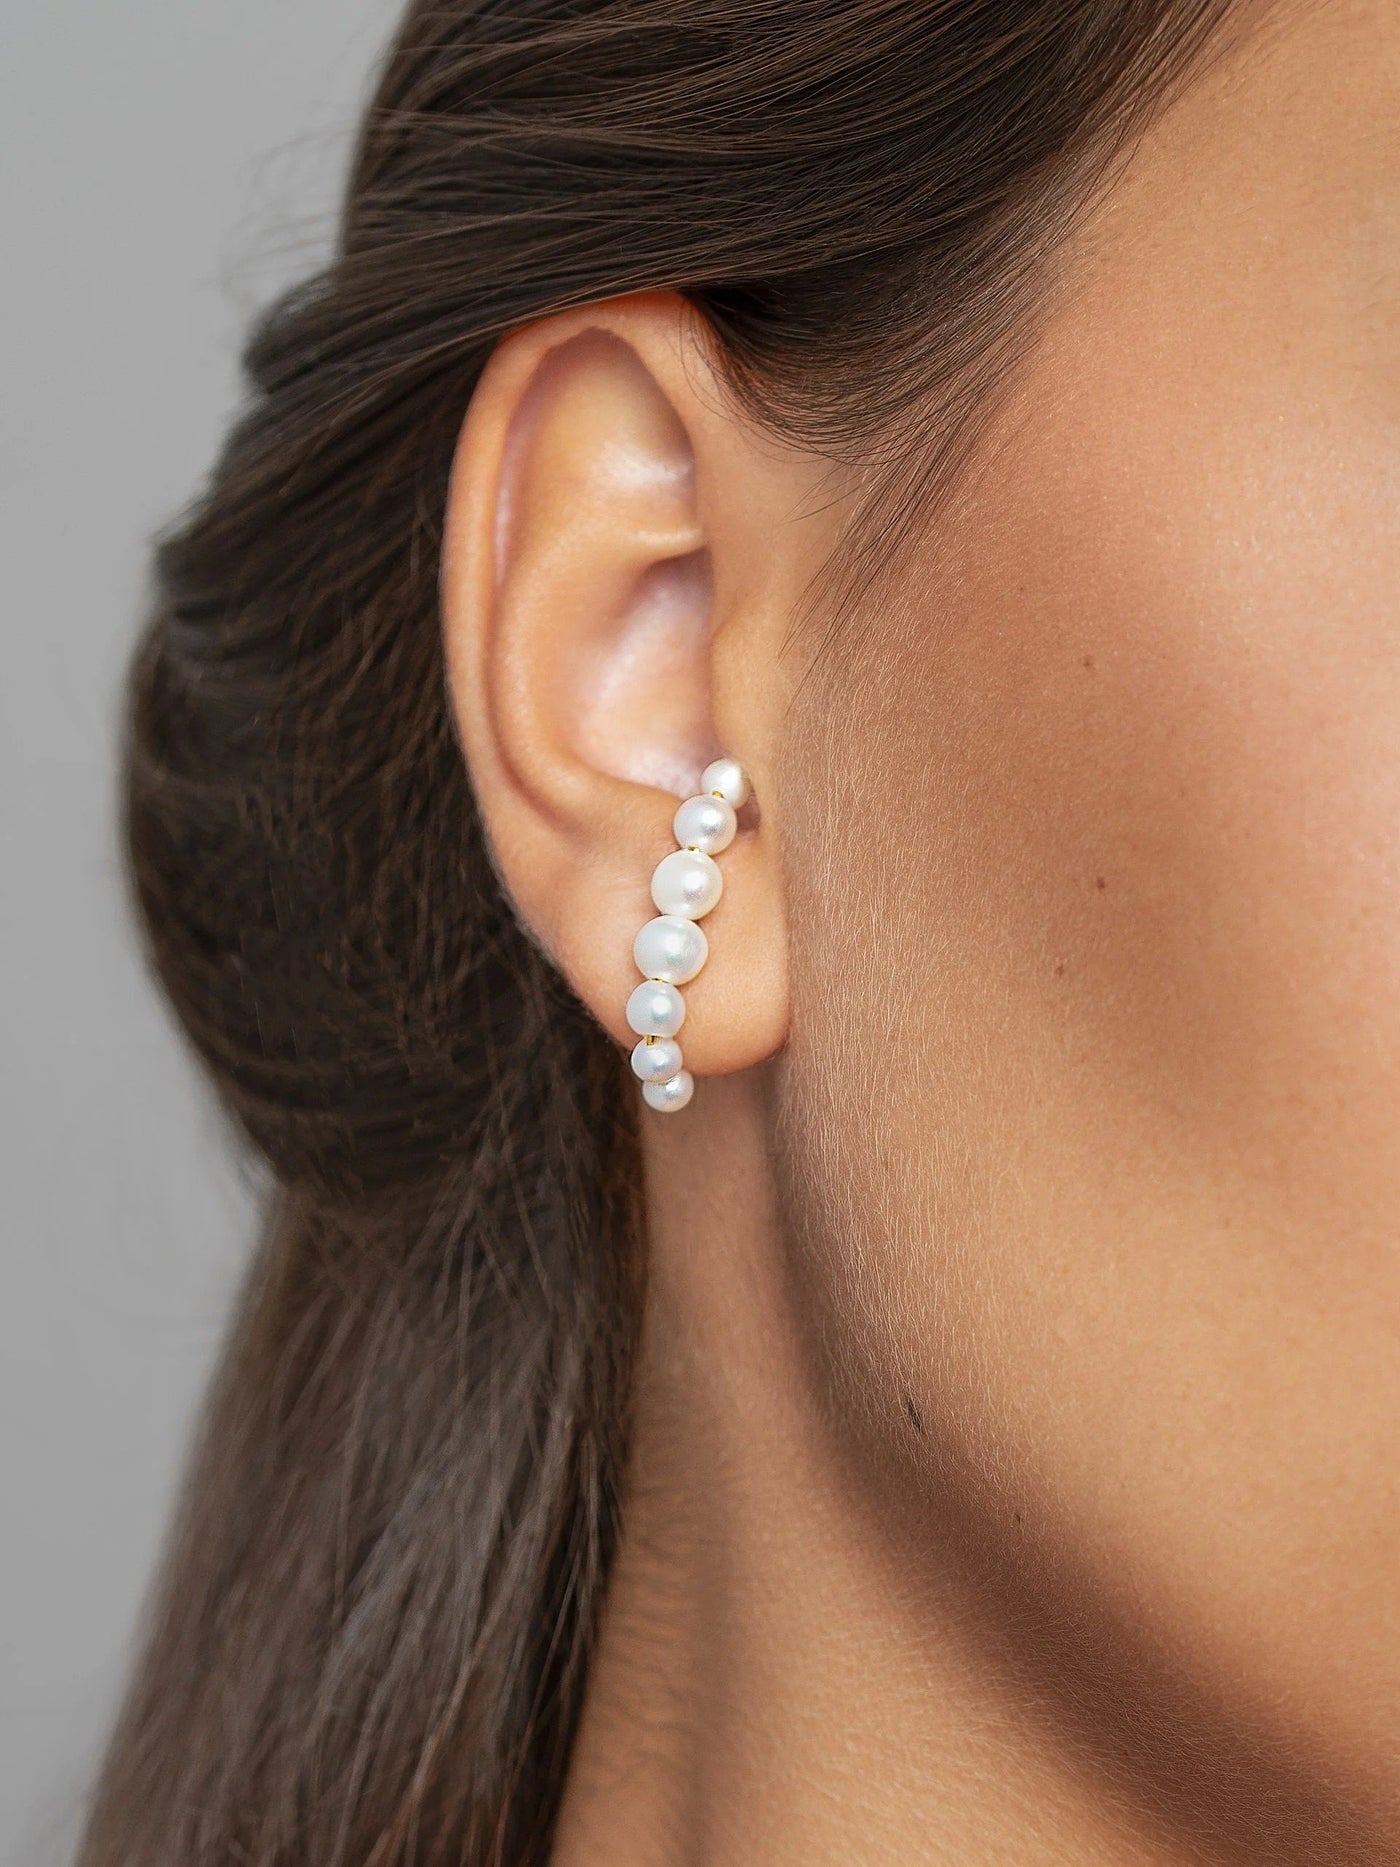 Statement Pearl Ear Cuffs - Handcrafted Solid Sterling Silver Earrings with Gold Plated Accents- STD138